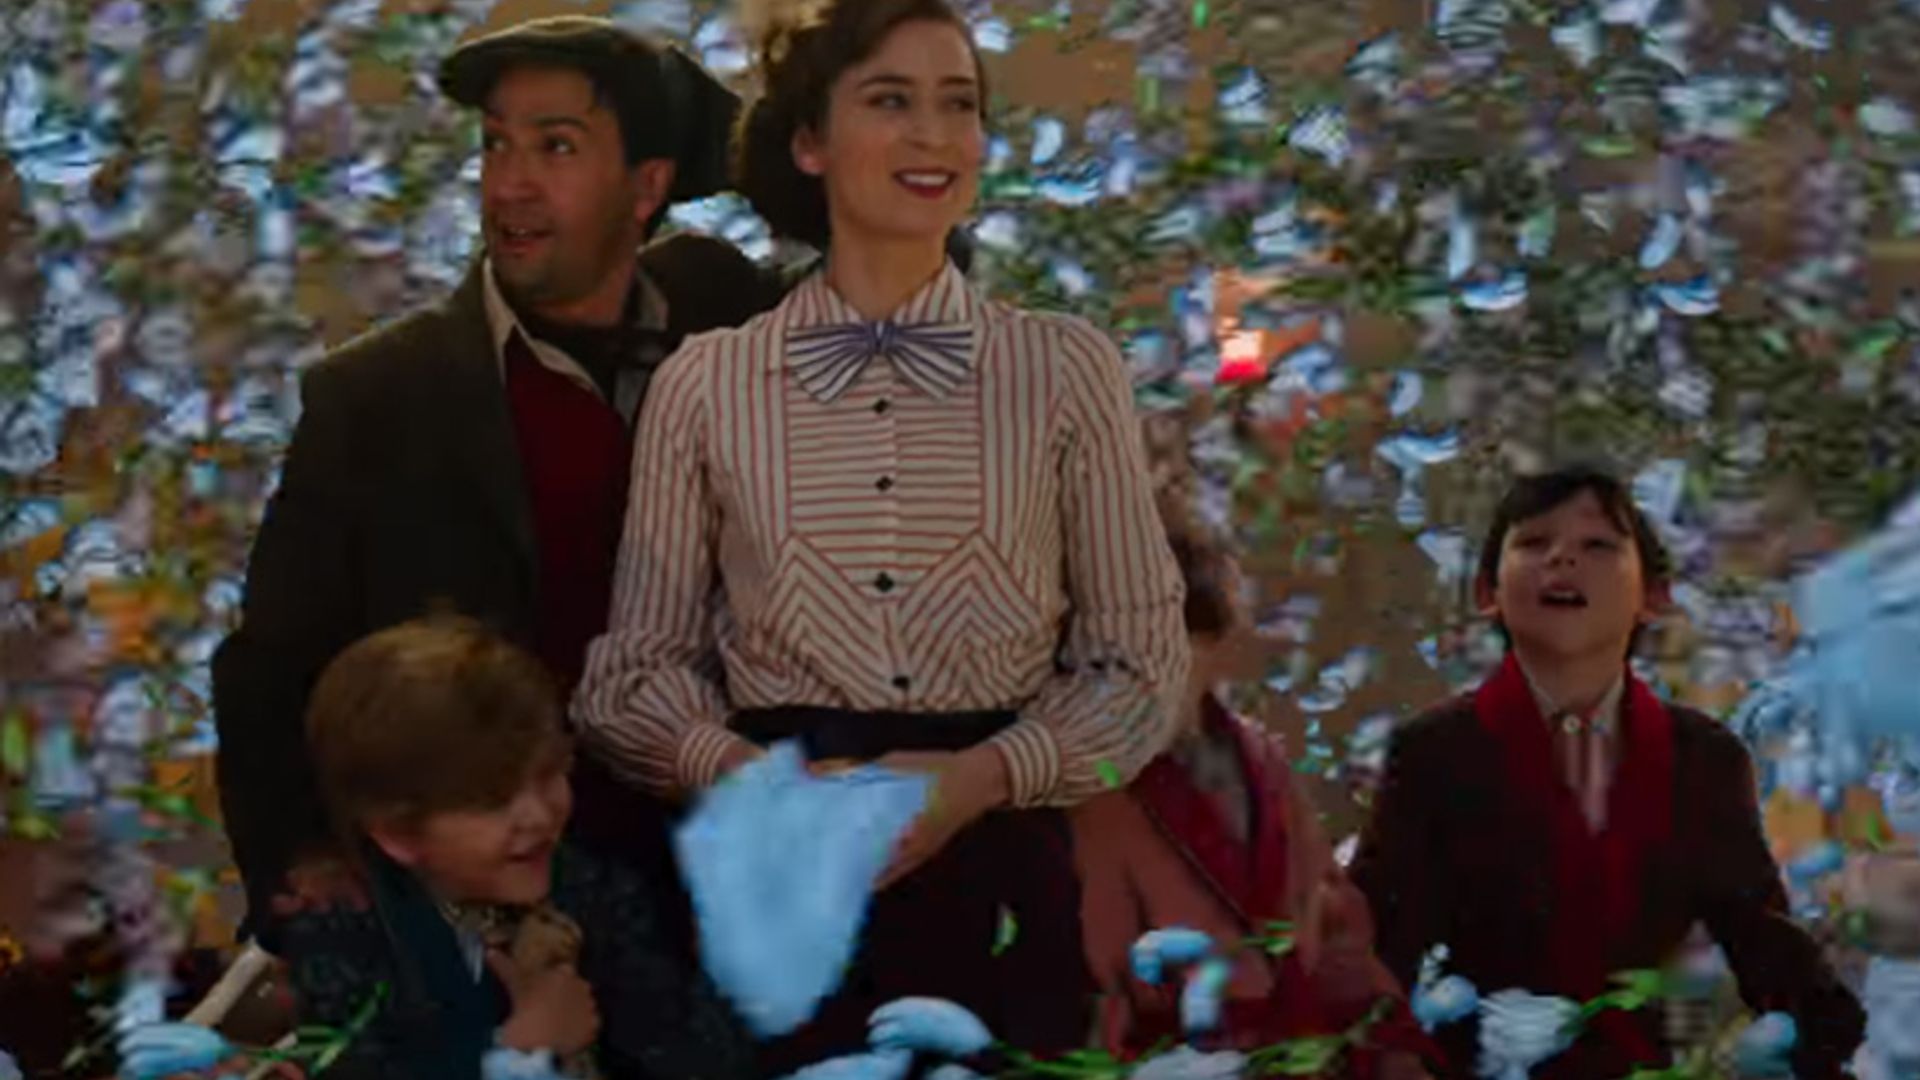 The full Mary Poppins trailer is here and it is magical – VIDEO